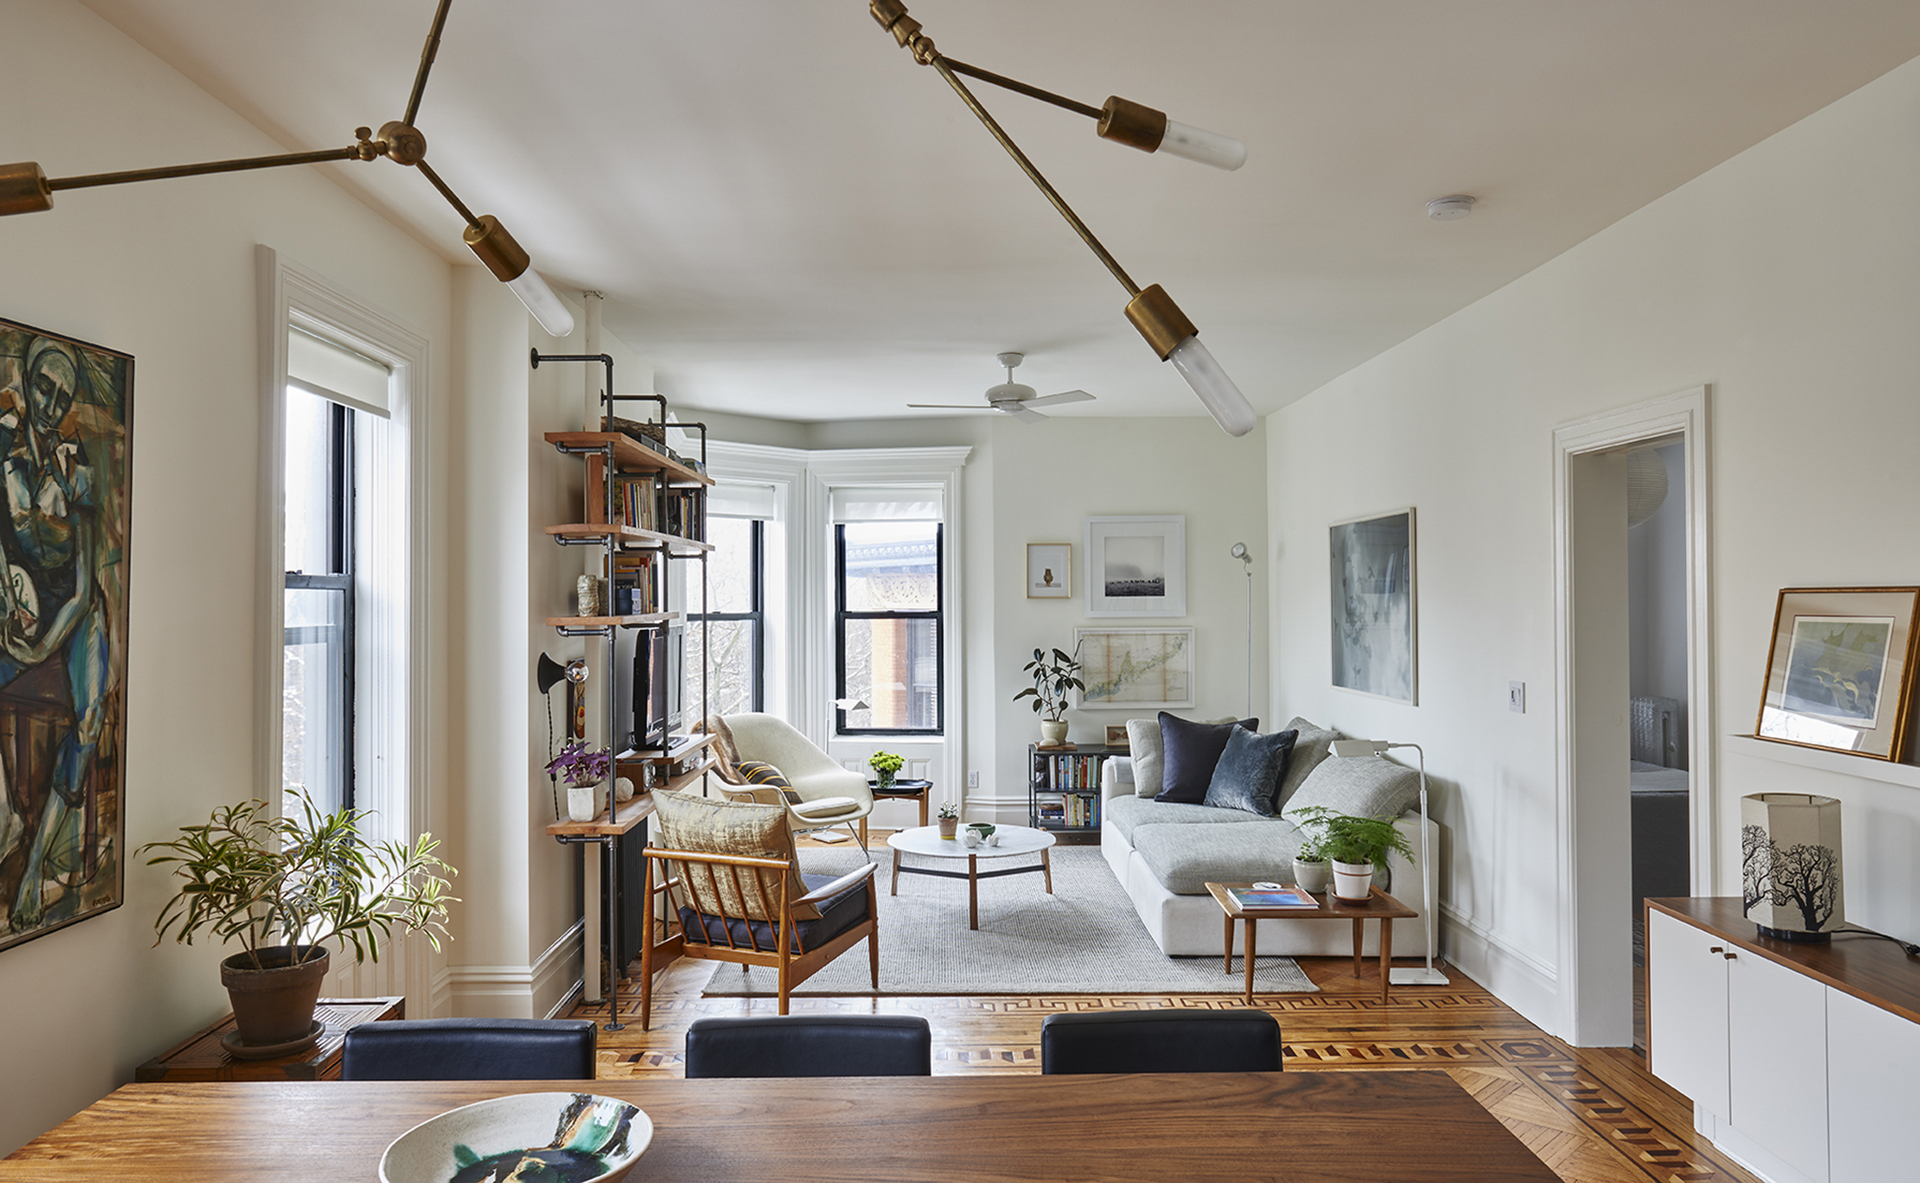 Small Space Project
Calderwood/Darter 
650 Sq Foot Apt.
Park Slope Brooklyn
 : Interior Projects : MICHEL ARNAUD PHOTOGRAPHY